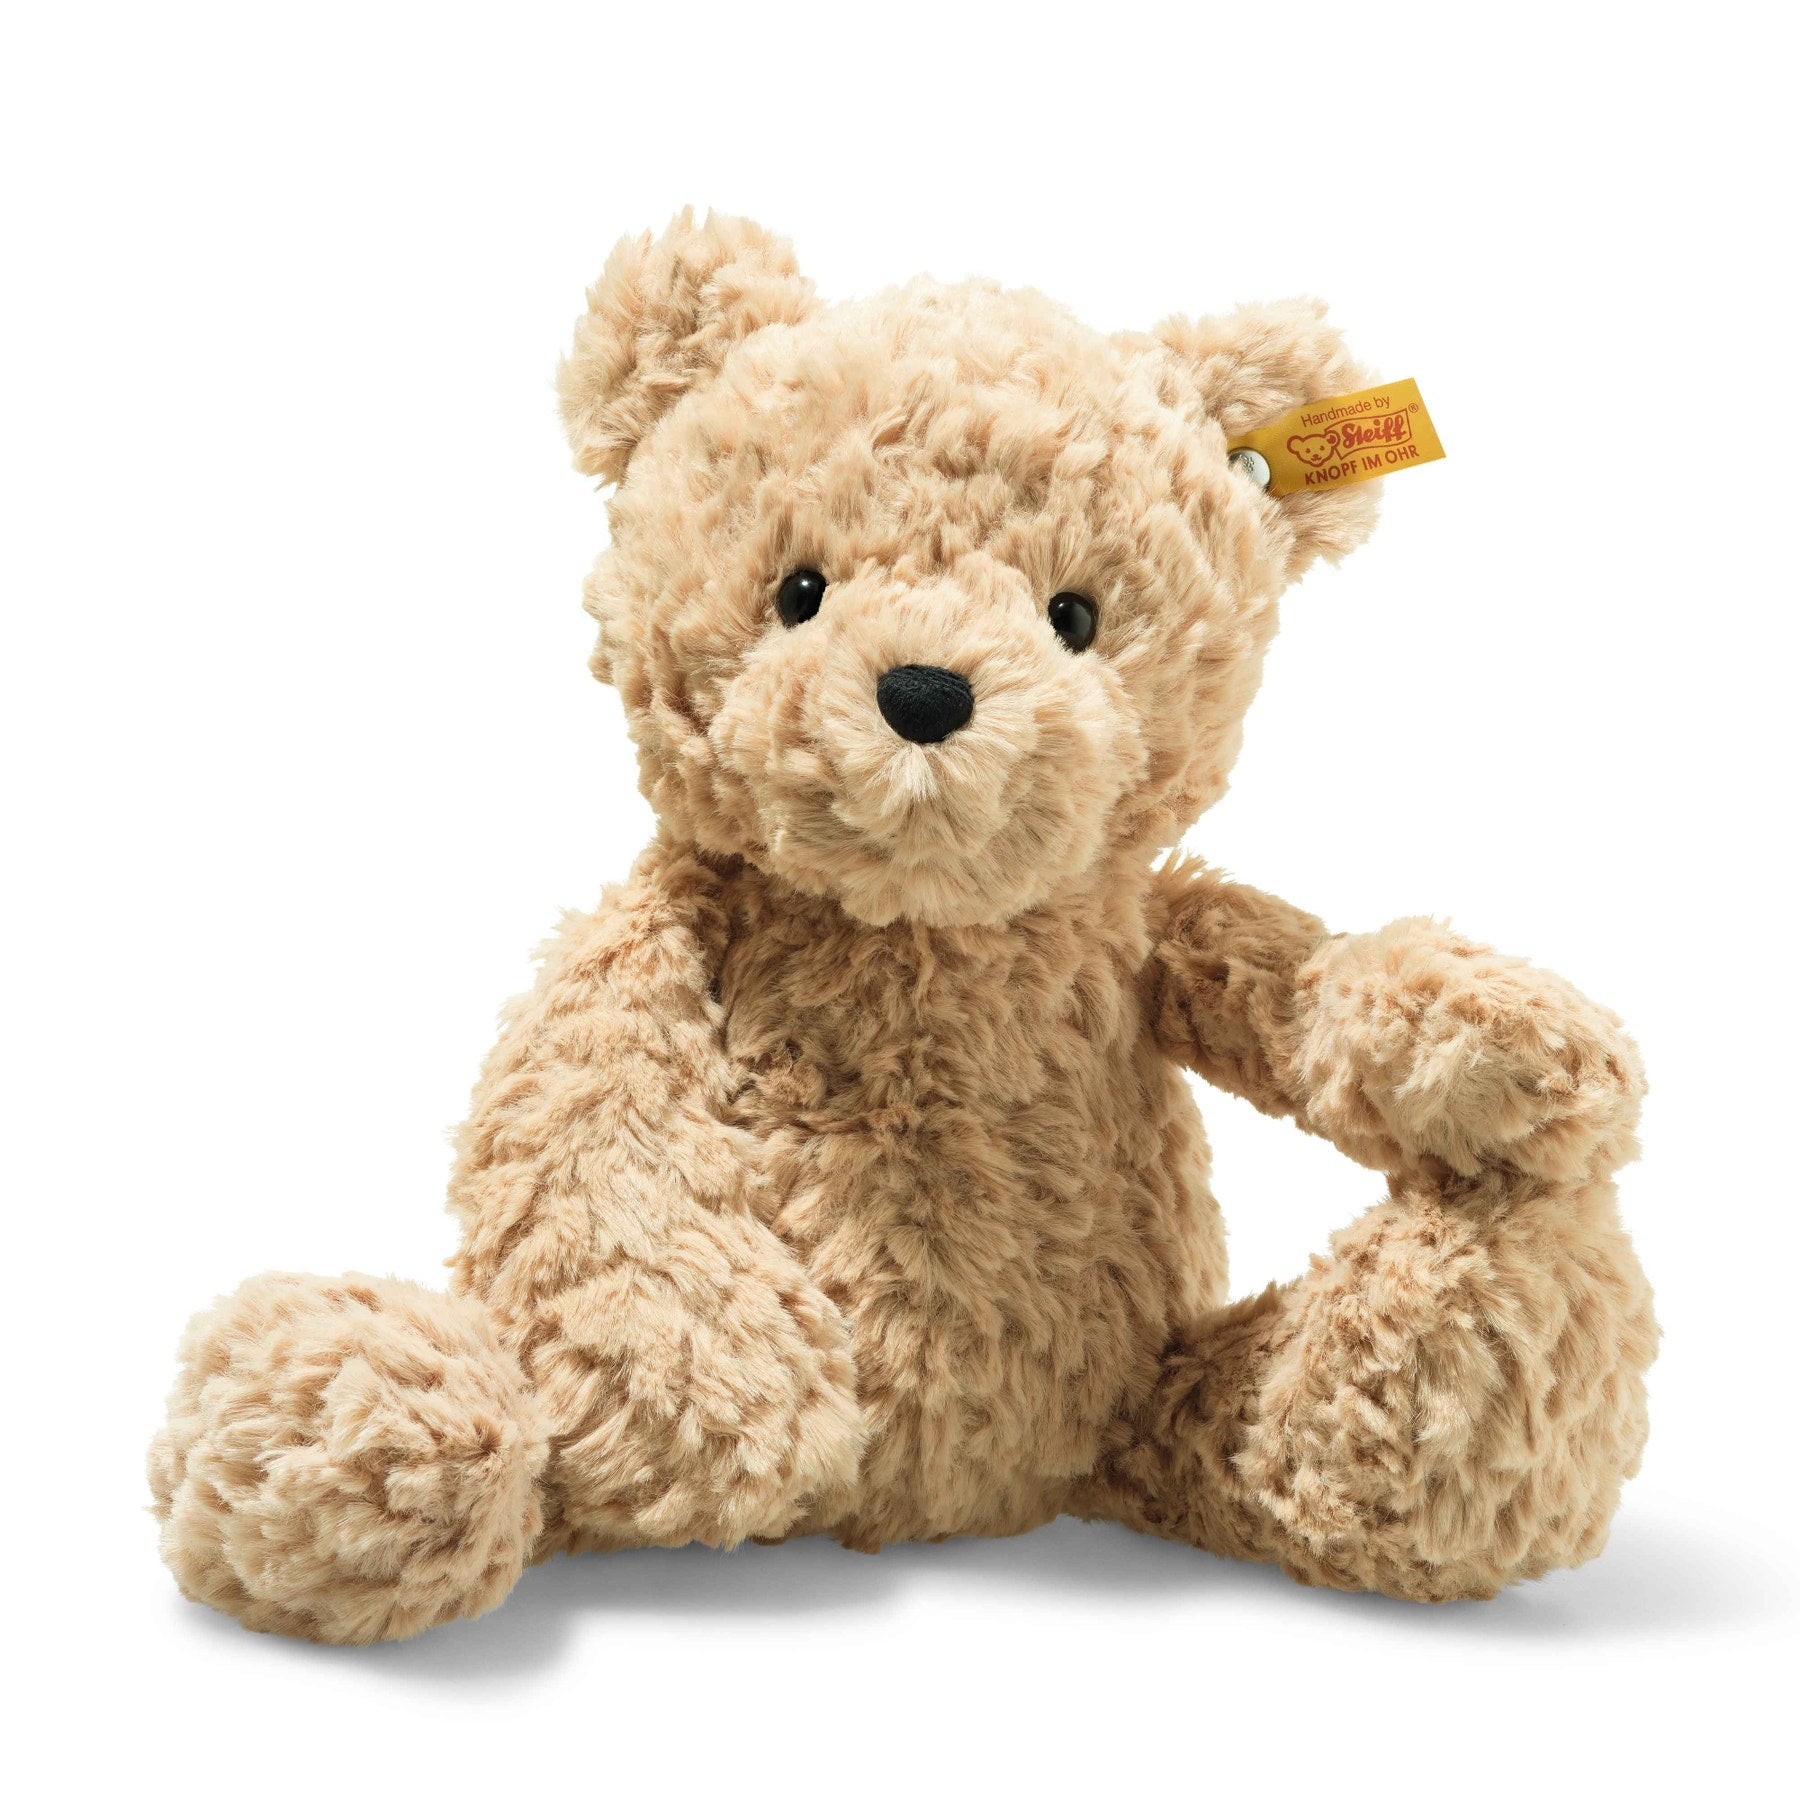 Jimmy Teddy Bear for baby and kid